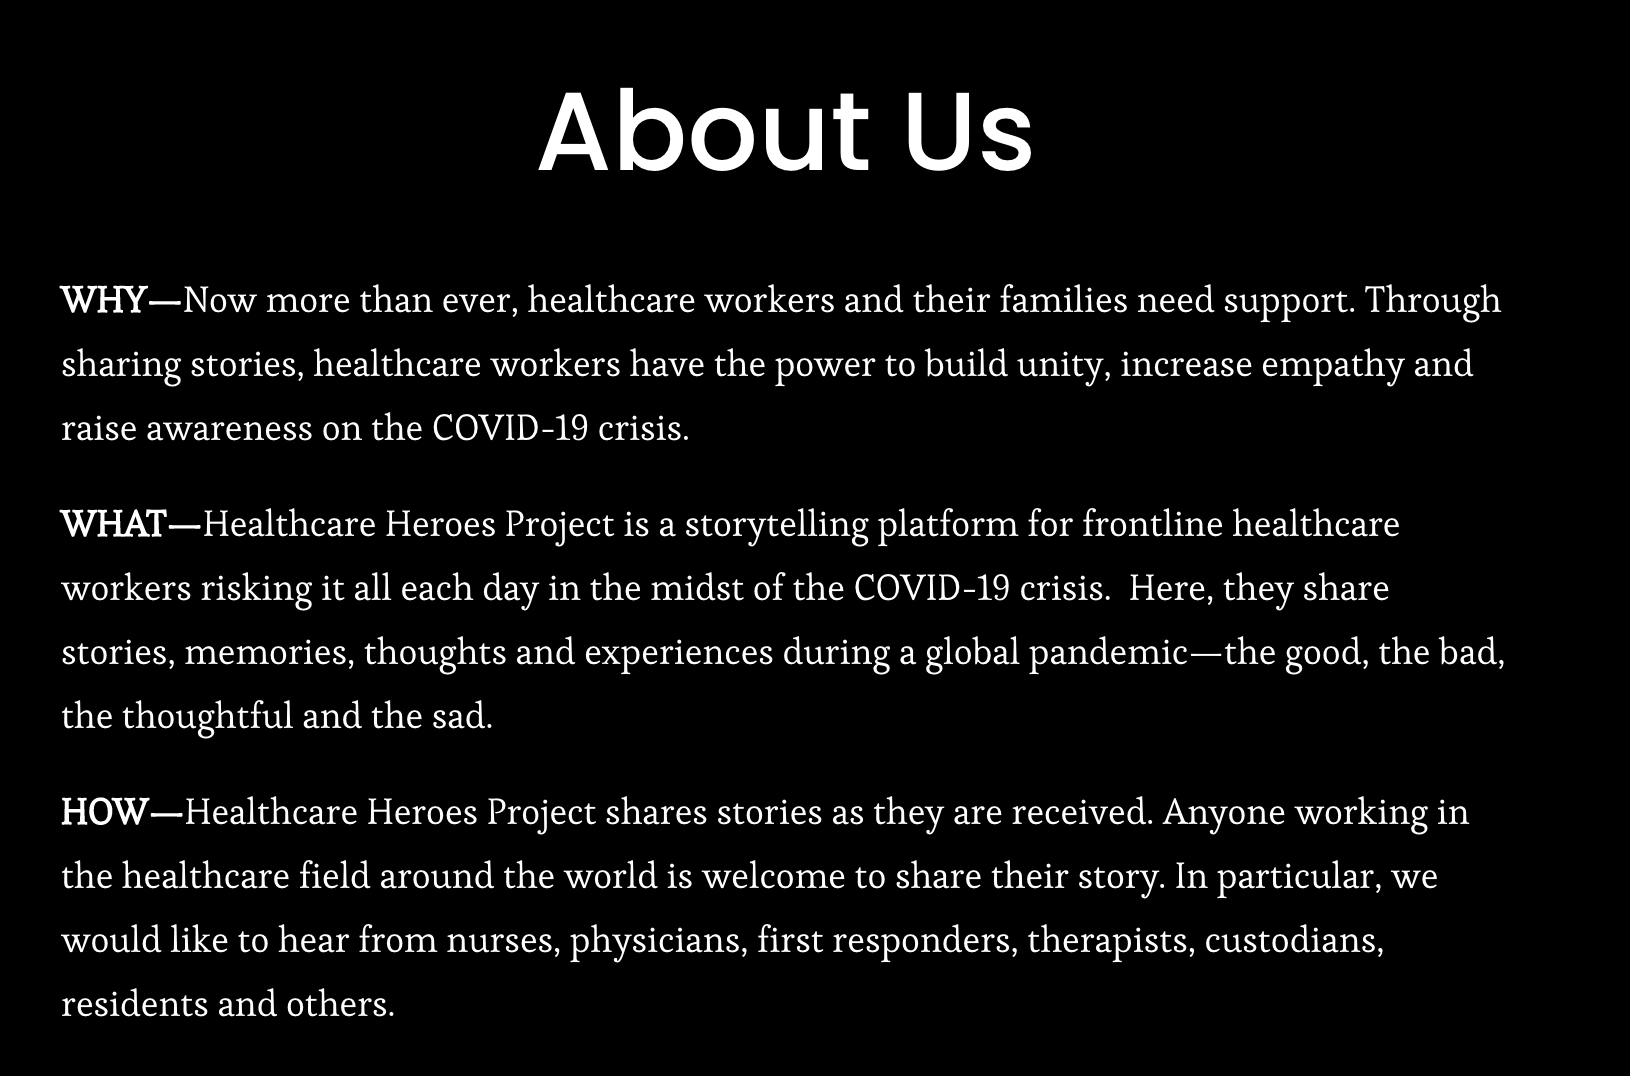 Healthcare Heroes Project About Us